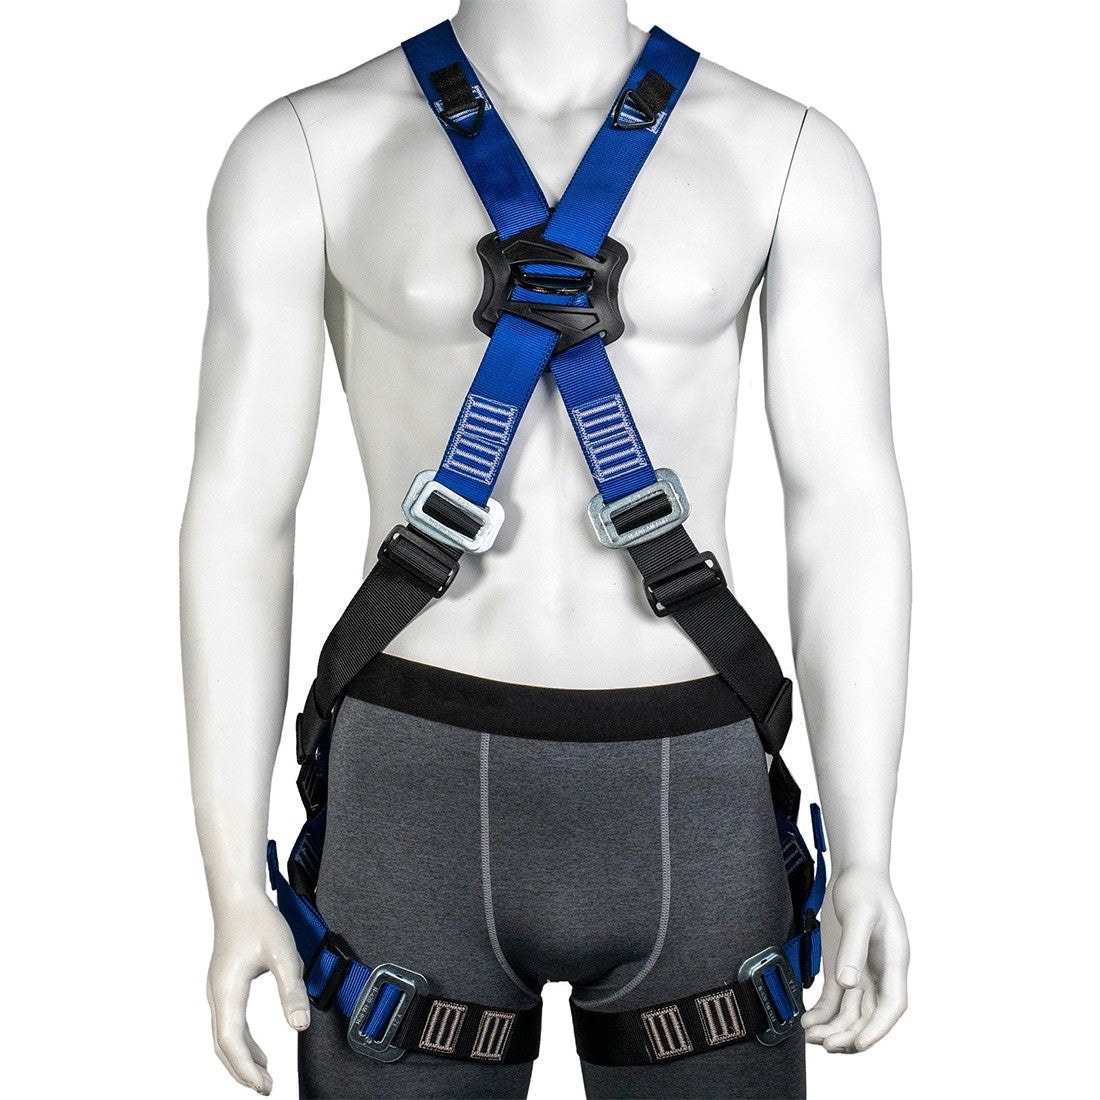 Sky Genie Full Body Helios Harness - On Mannequin - Front View